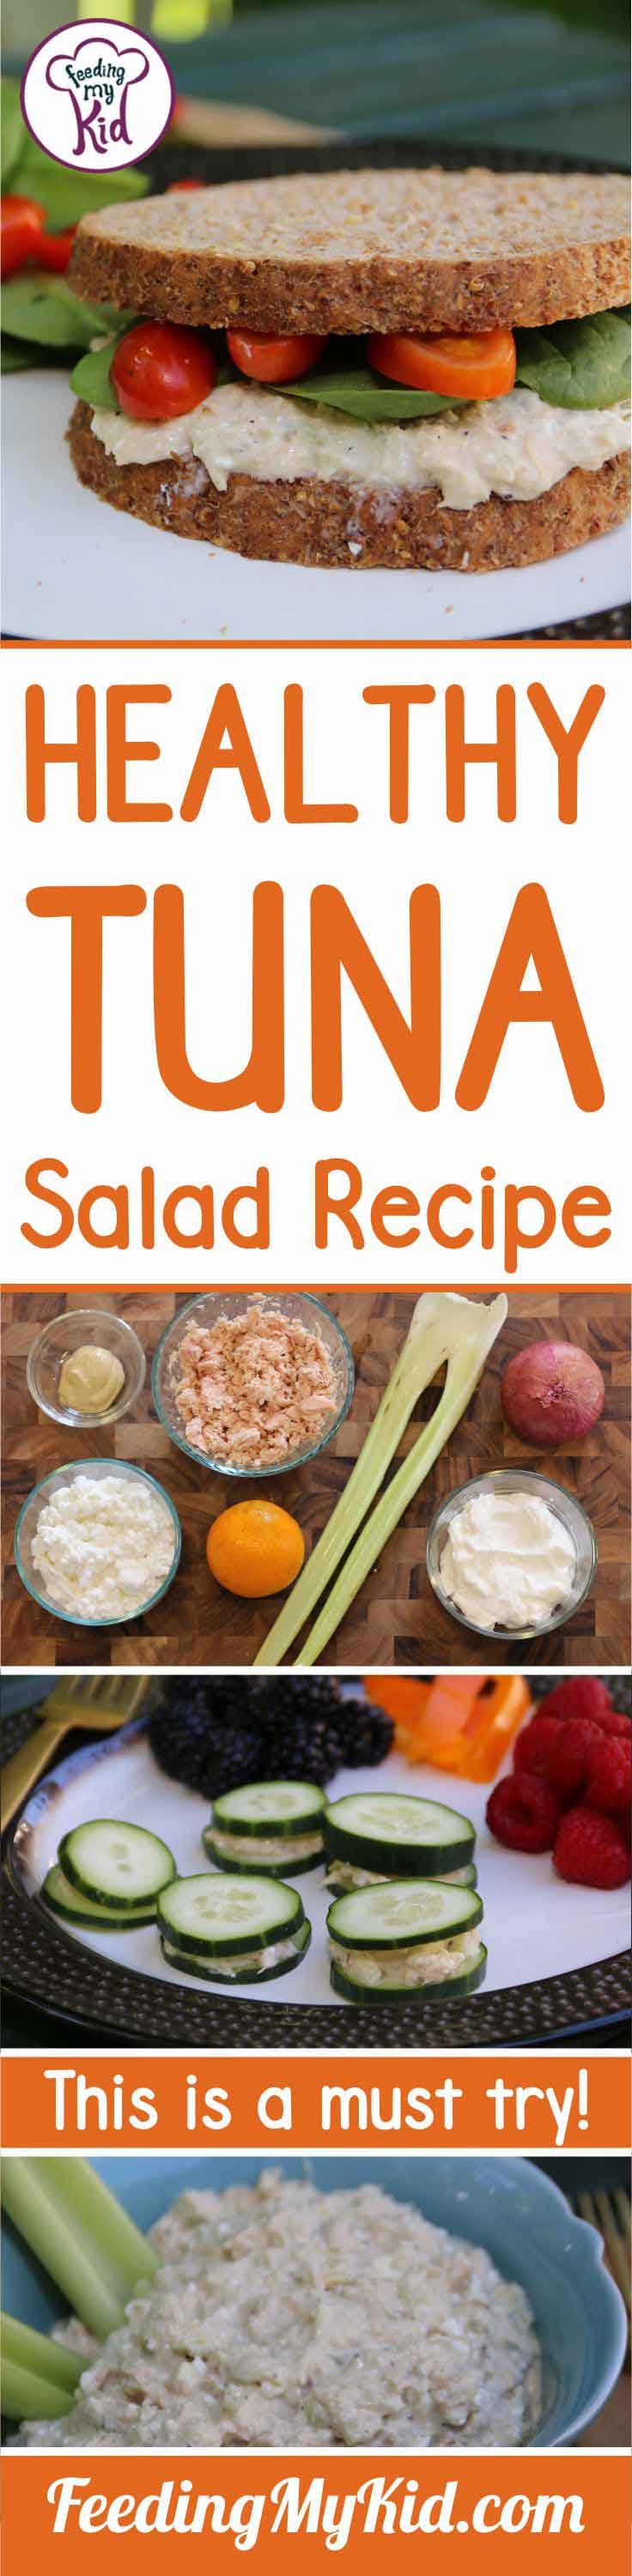 This is a great tuna recipe to try at home! It's super easy, flavorful and is jam packed with extra protein and nutrition.